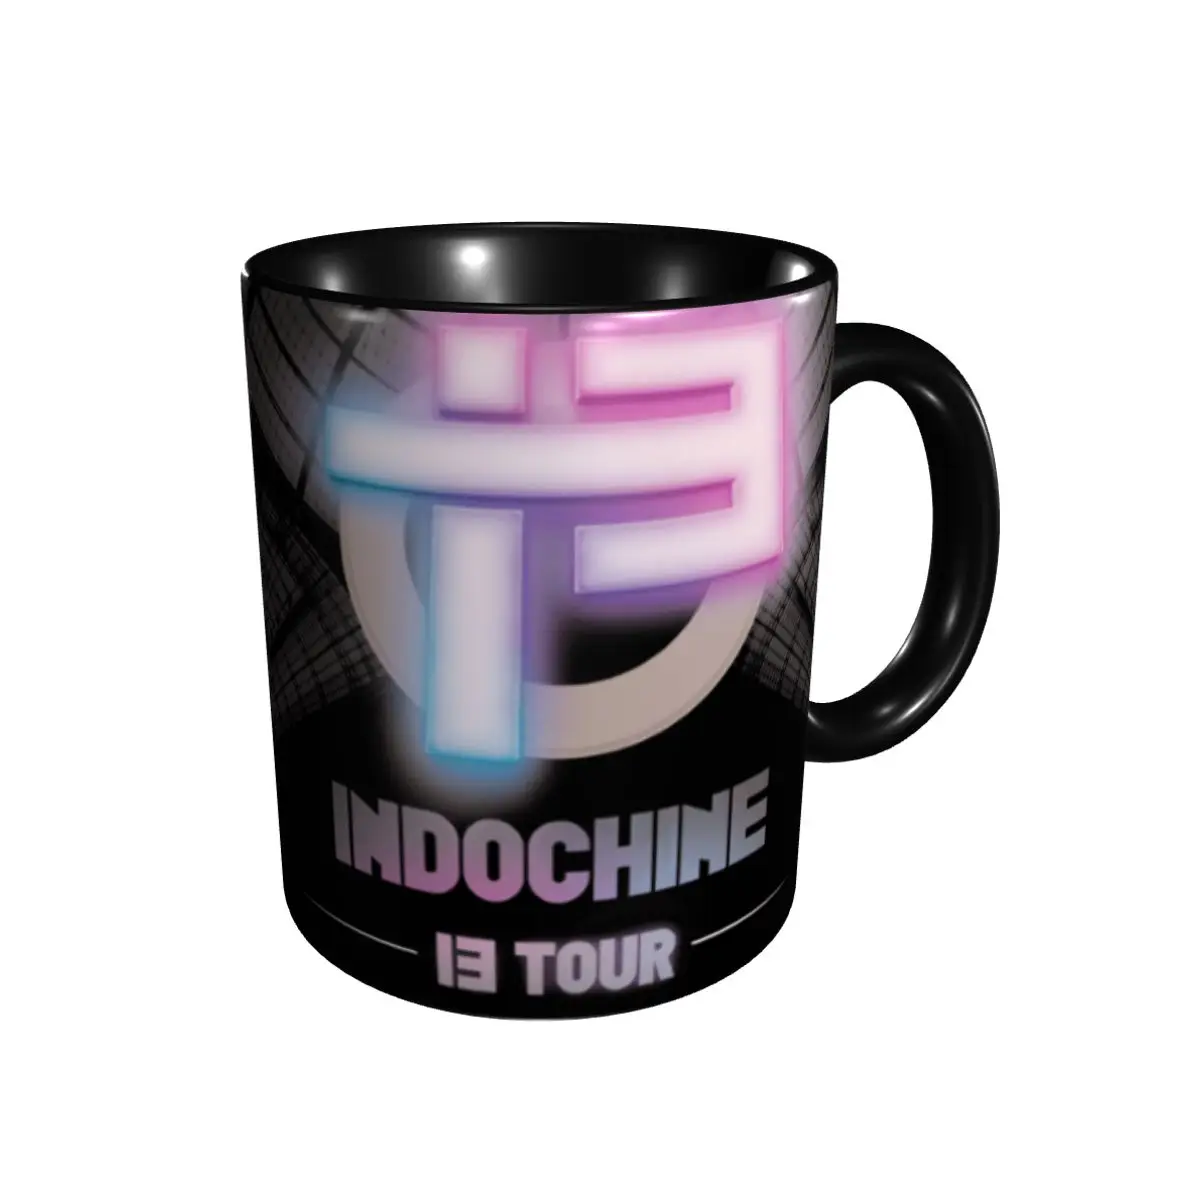 Promo Indo Chine Most Popular Band Rock Indochine Is Mugs Top Quality Cups Mugs Print Sarcastic R145 Case tea cups